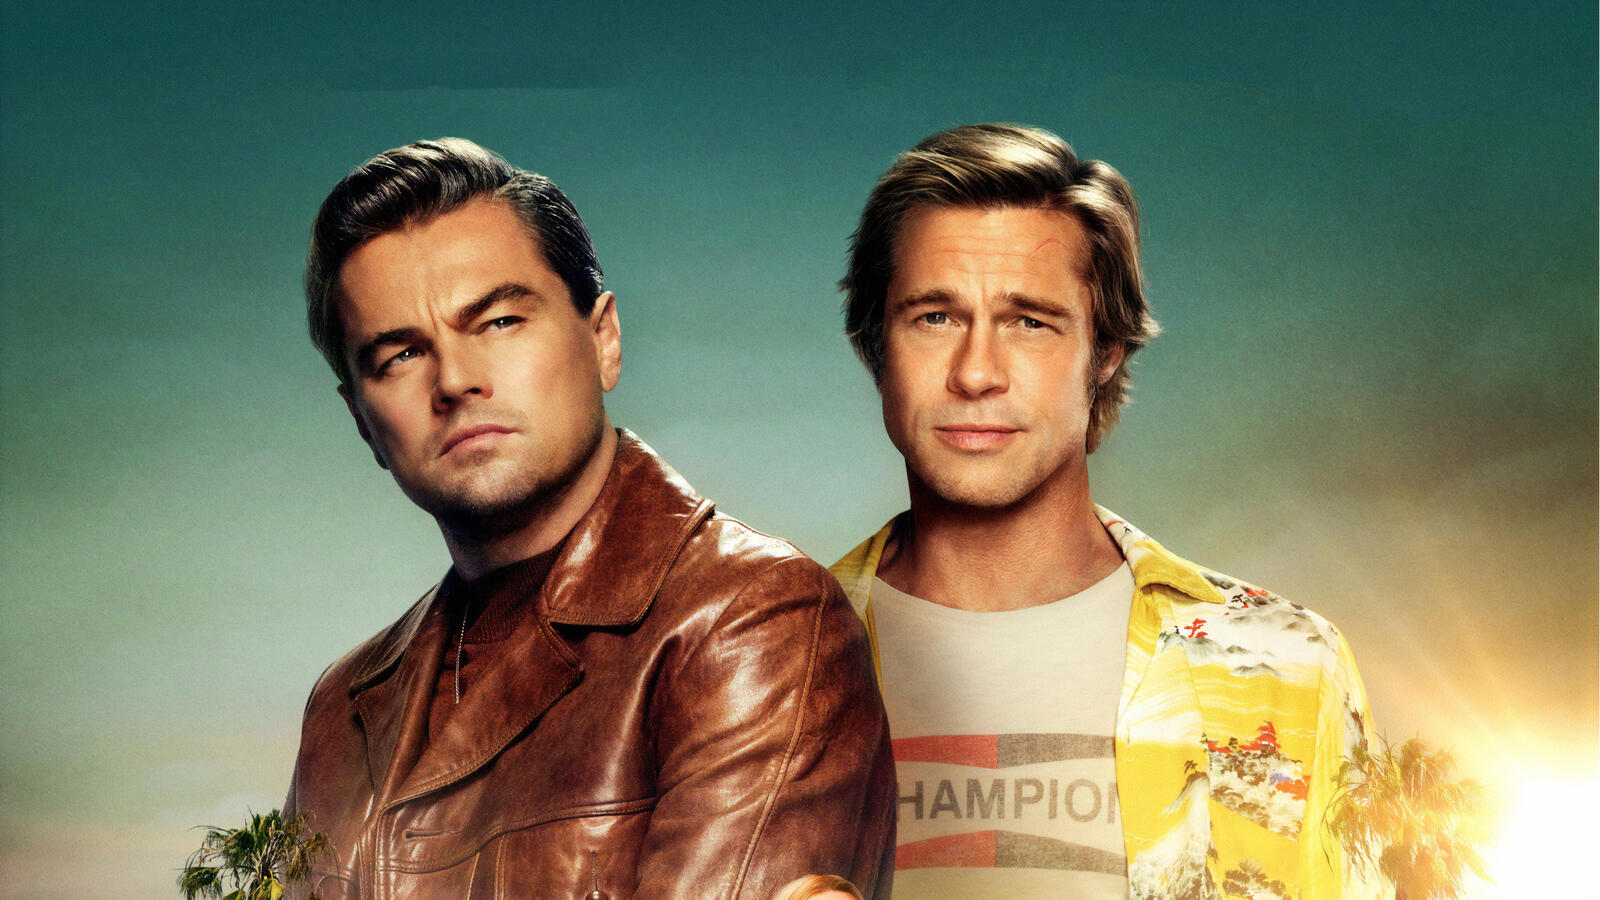 Wallpapers Once Upon a Time in Hollywood 2019 Movies movies on the desktop